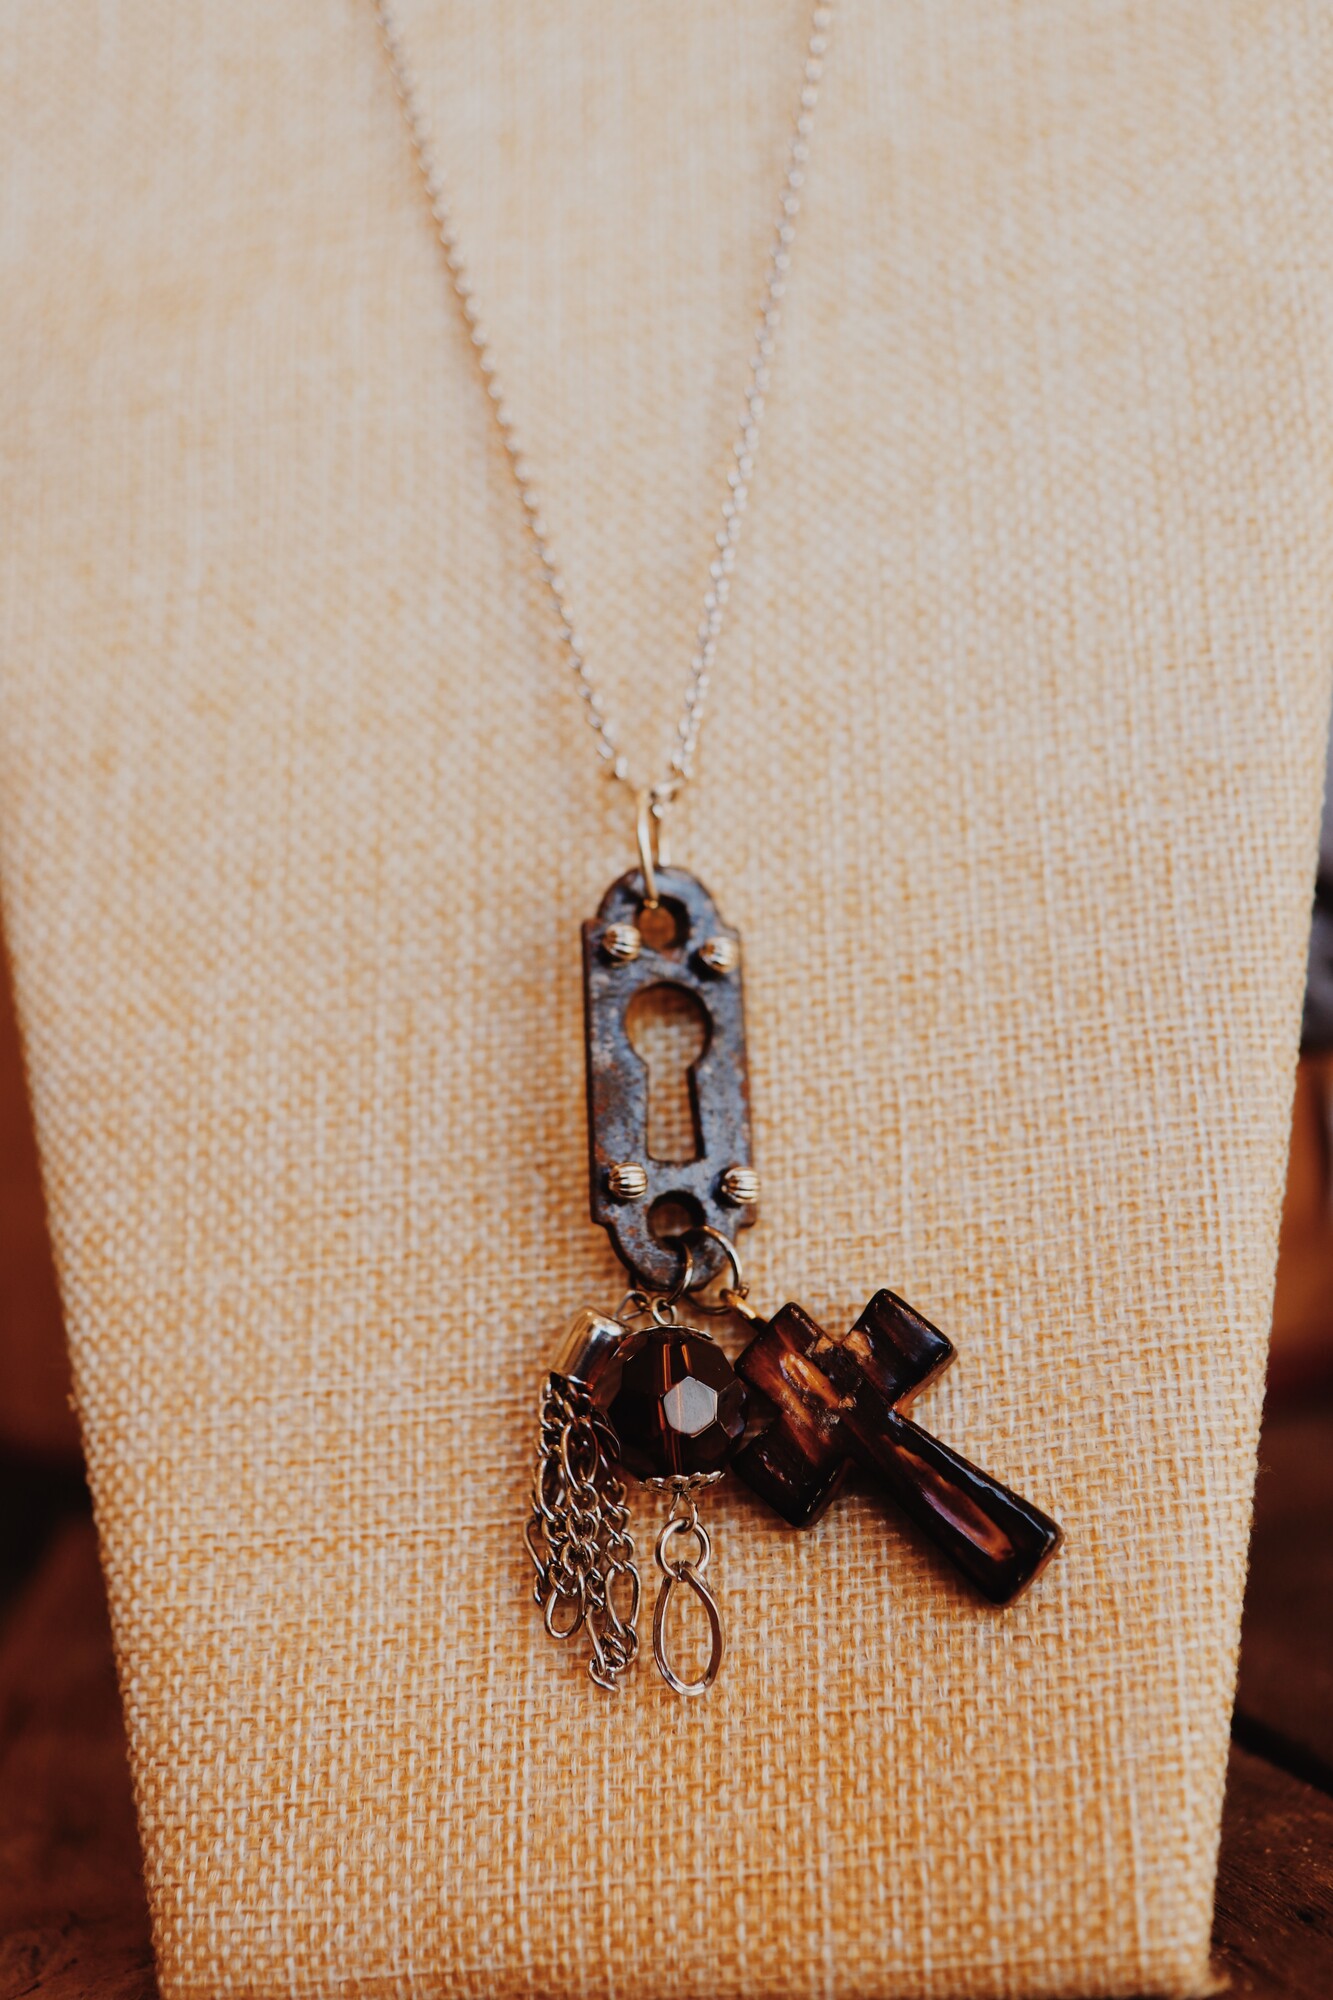 This necklace from Kelli Hawk Designs was handmade from vintage pieces! The pendant includes a vintage keyhole, a cross, an amber bead, and a chain tassel.  This hangs on an 18 inch chain.